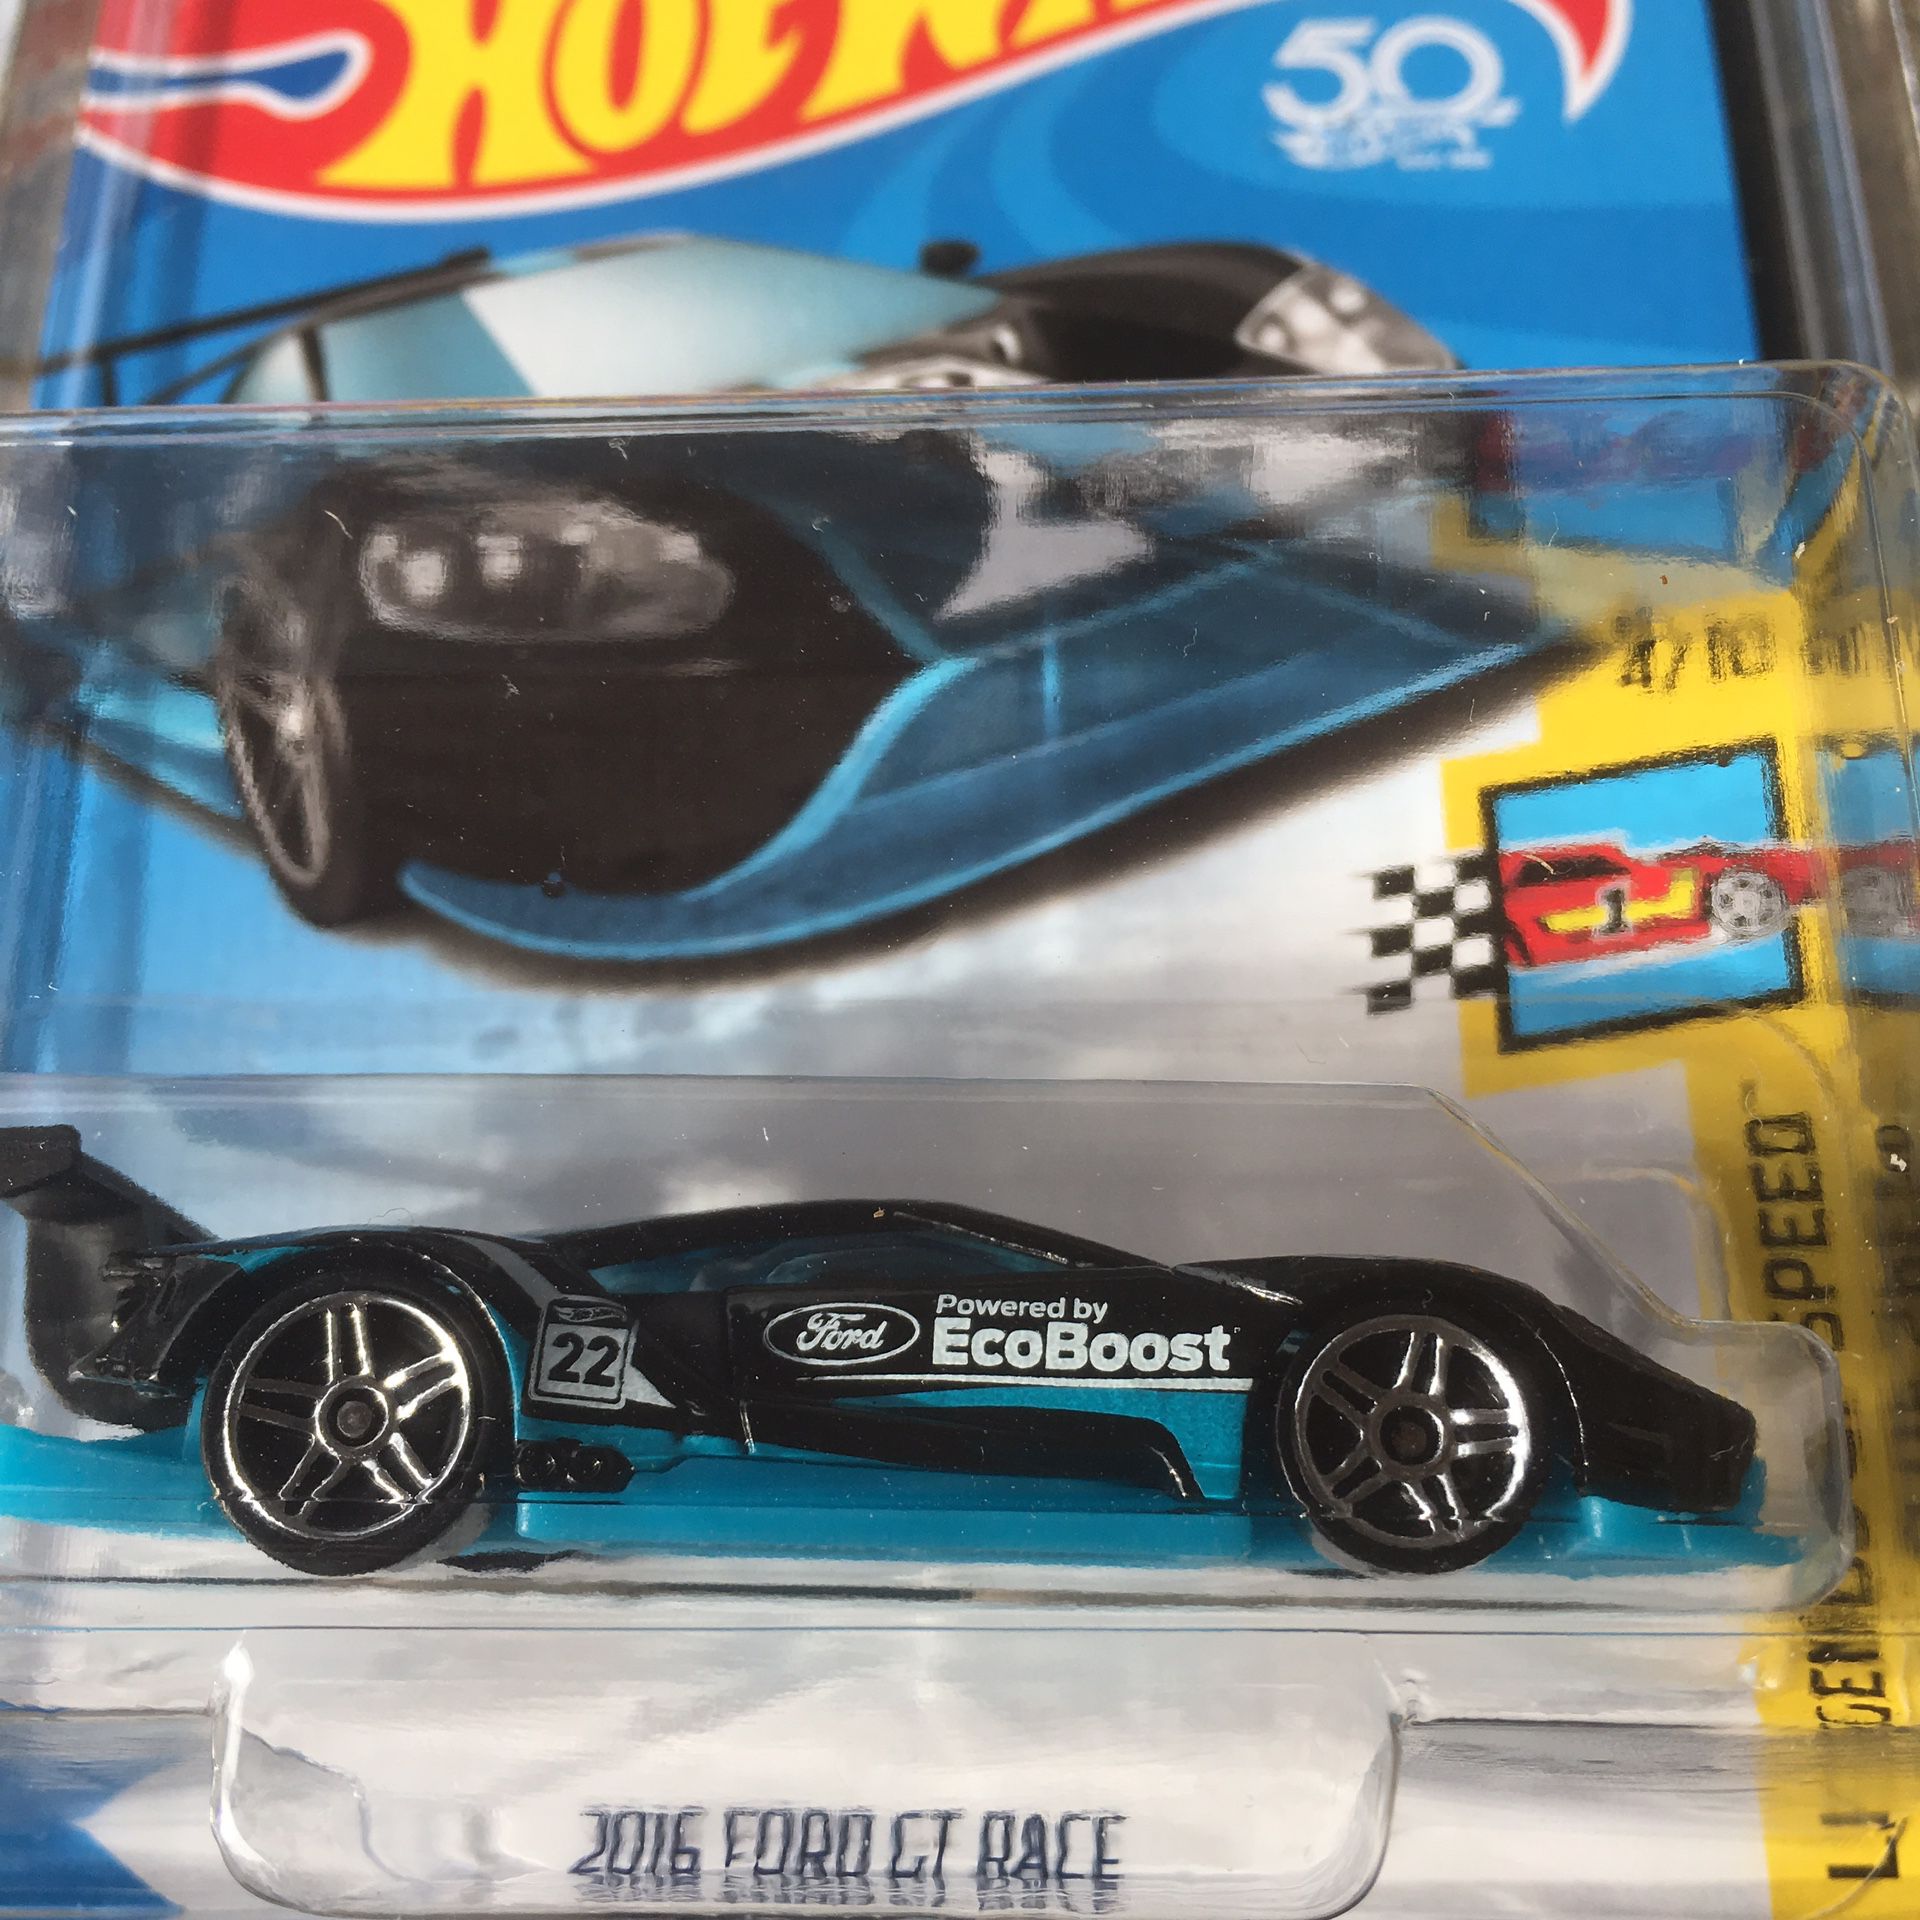 Hot wheels ford gt eco boost EXCLUSIVE KROGER!!! Collectible die cast toy car $5 obo trade Hotwheels jdm honda Nissan datsun Civic gtr integra crx